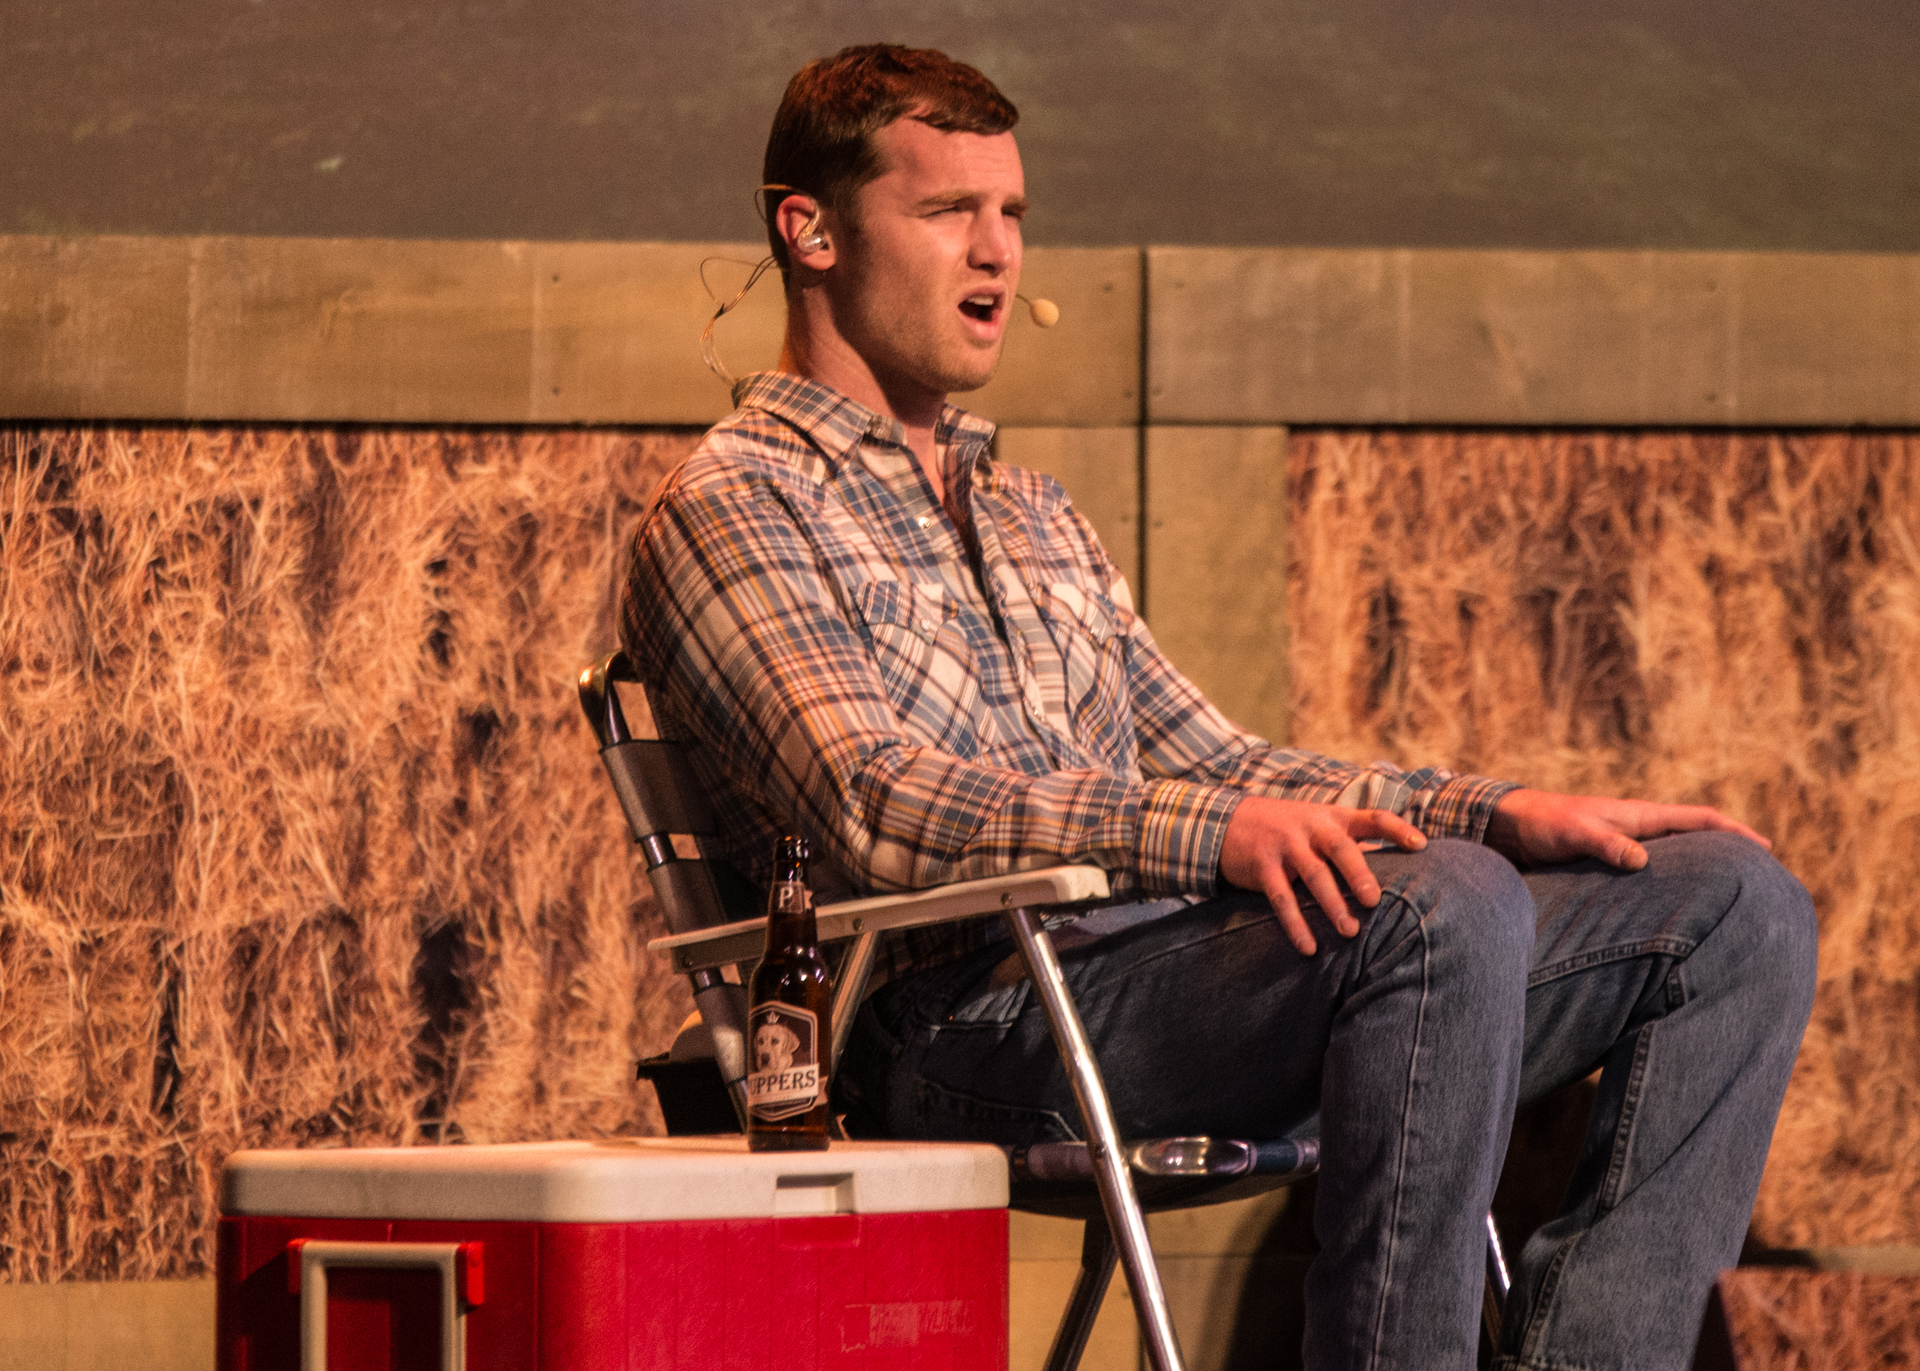 Jared Keeso sits comfortably on stage, donned in a blue and white plaid shirt and blue jeans, engaging with the audience through a headworn microphone. Beside him, a red cooler with a Puppers beer atop adds a touch of character. The backdrop of hay completes the rustic and inviting atmosphere, setting the stage for a unique and enjoyable performance.